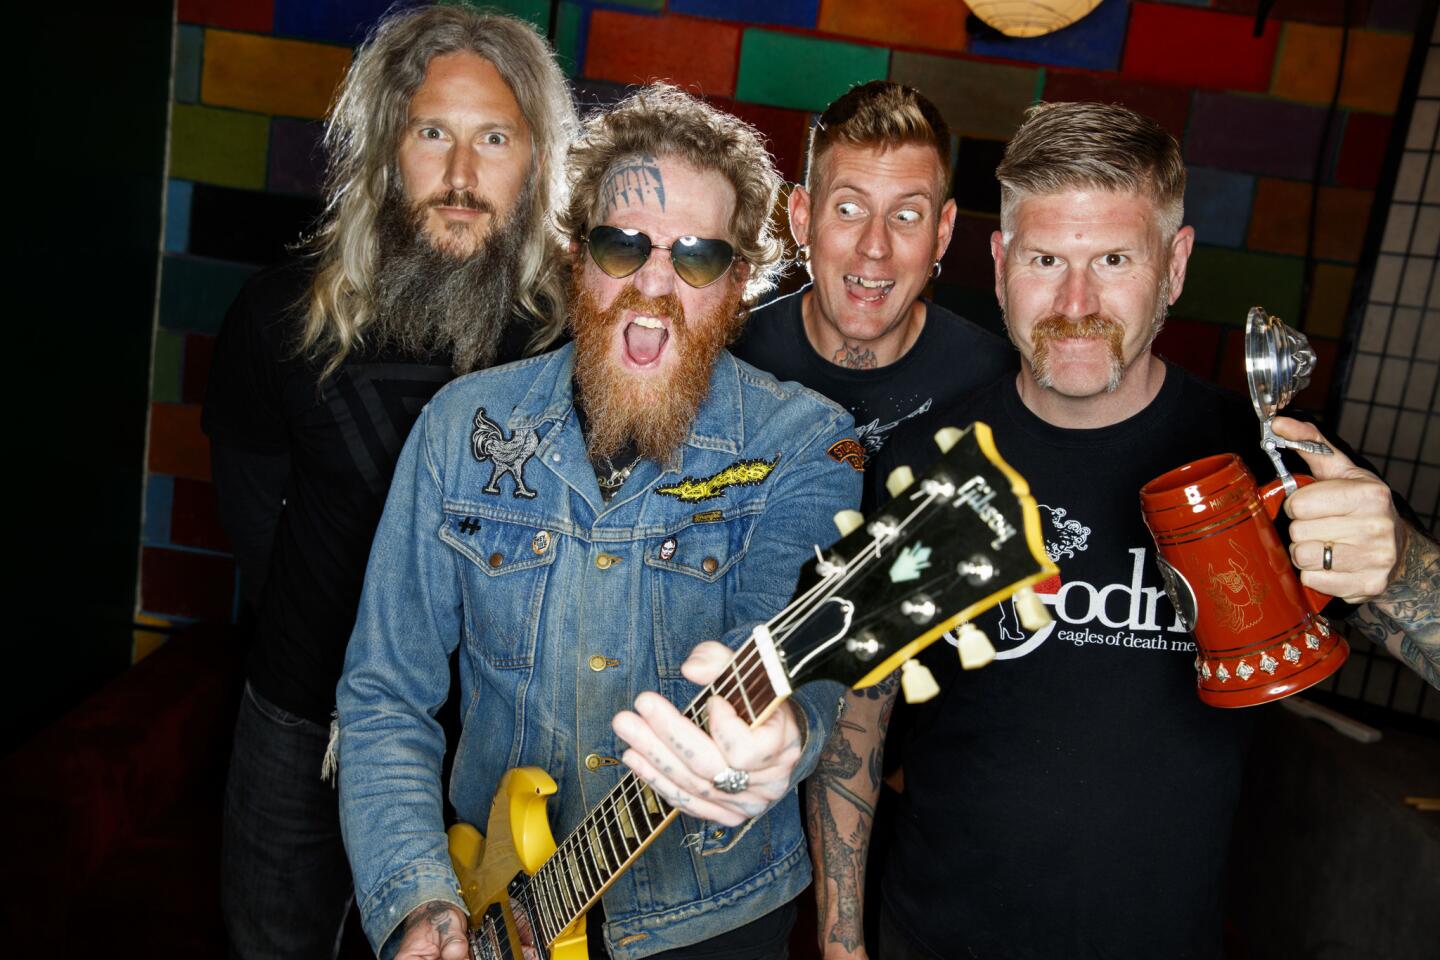 Heavy metal band Mastodon members, from left, Troy Sanders, Brent Hinds, Brann Dailor and Bill Kelliher before their performance at Amoeba Music in Hollywood. The band has a new album, "Emperor of Sand."